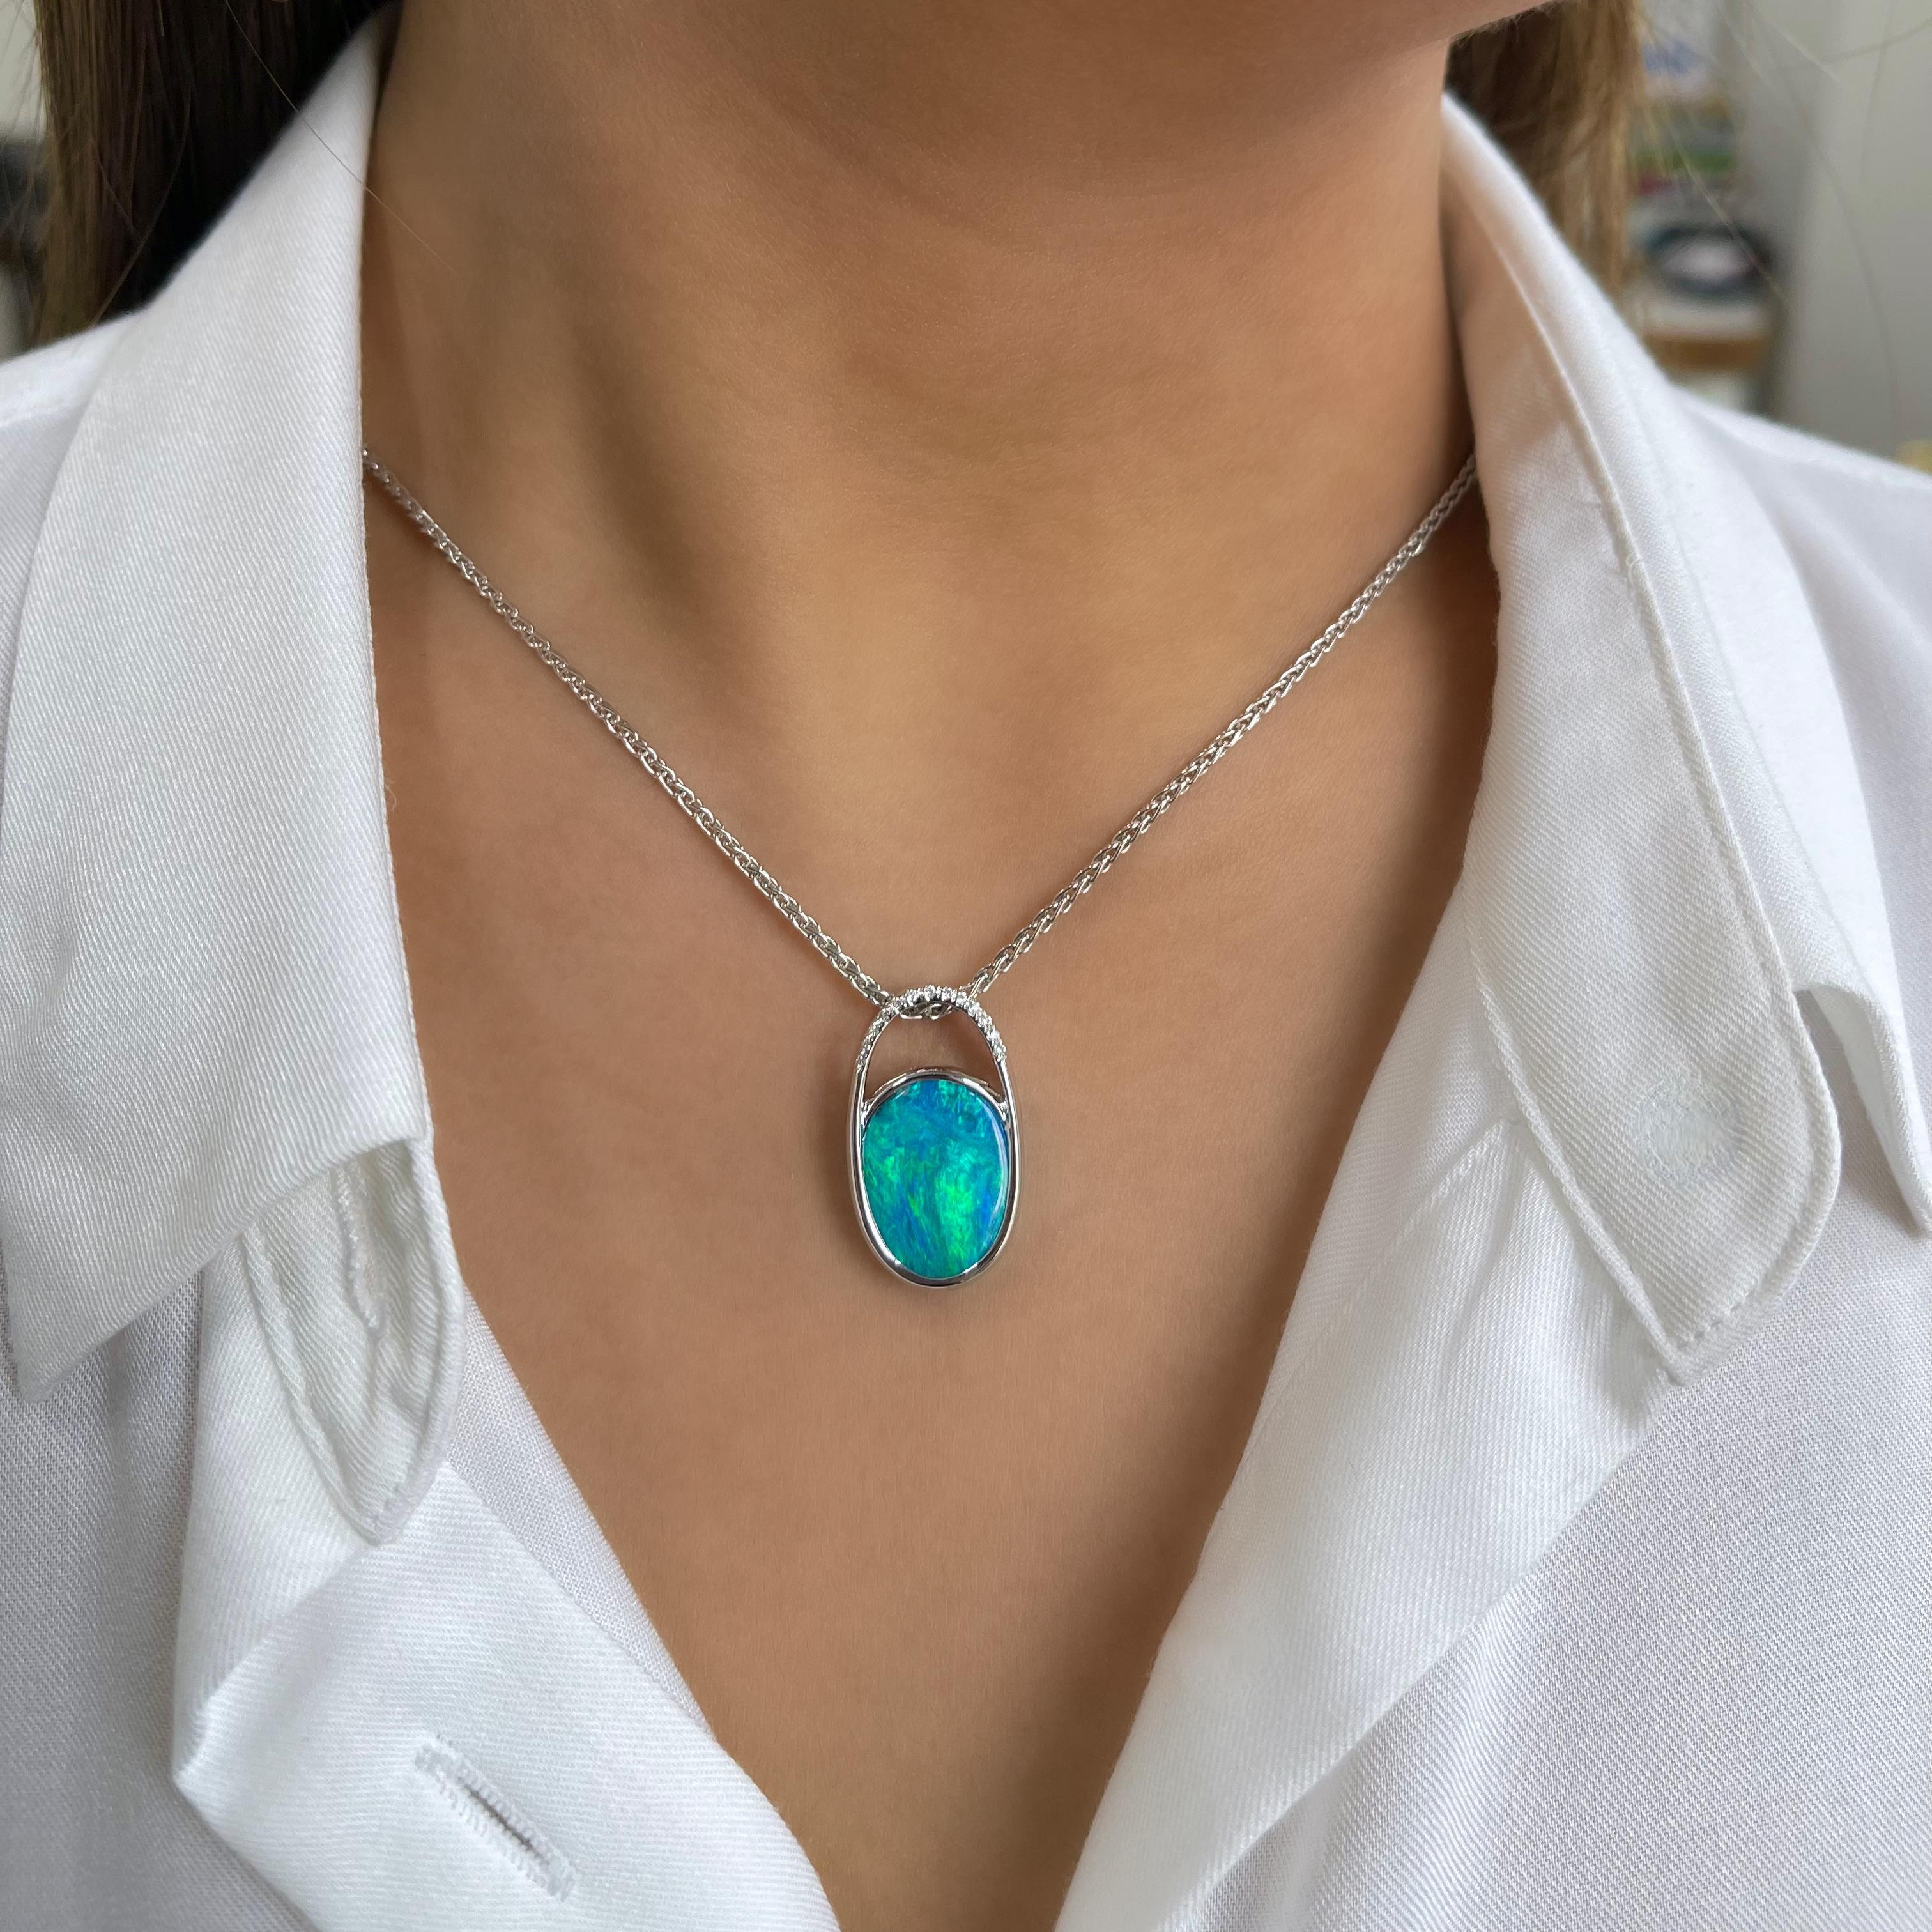 The impressive ‘You Make My Dreams’ boulder opal pendant (9.50ct) exudes modern elegance and is bound to bring out the striking and sophisticated air of its wearer. The precious gemstone of this piece hails from Winton mines and features a